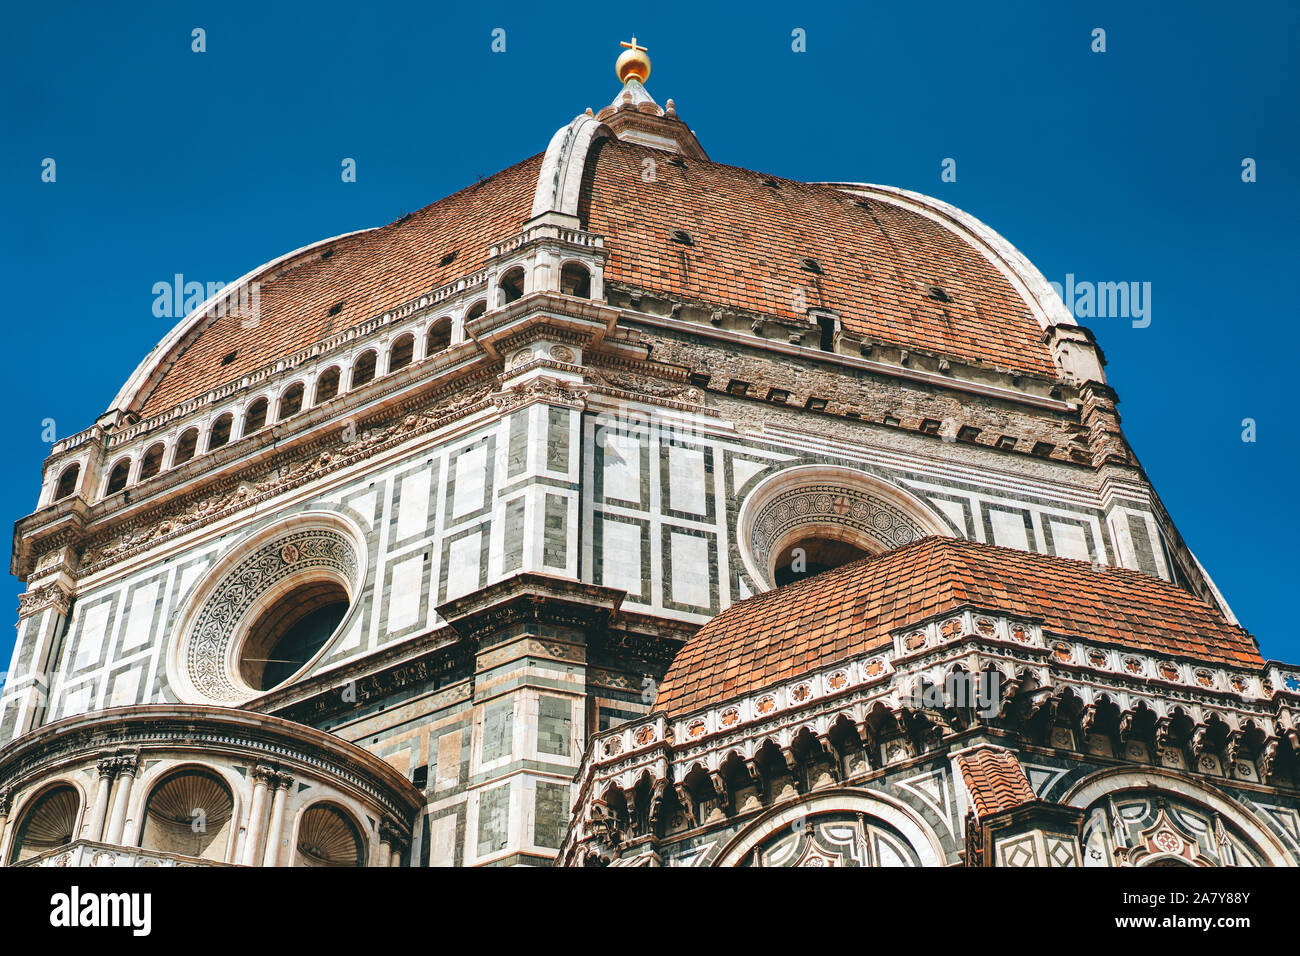 Duomo, Cattedrale di Santa Maria del Fiore, or Basilica of Saint Mary of the Flower in Florence Stock Photo